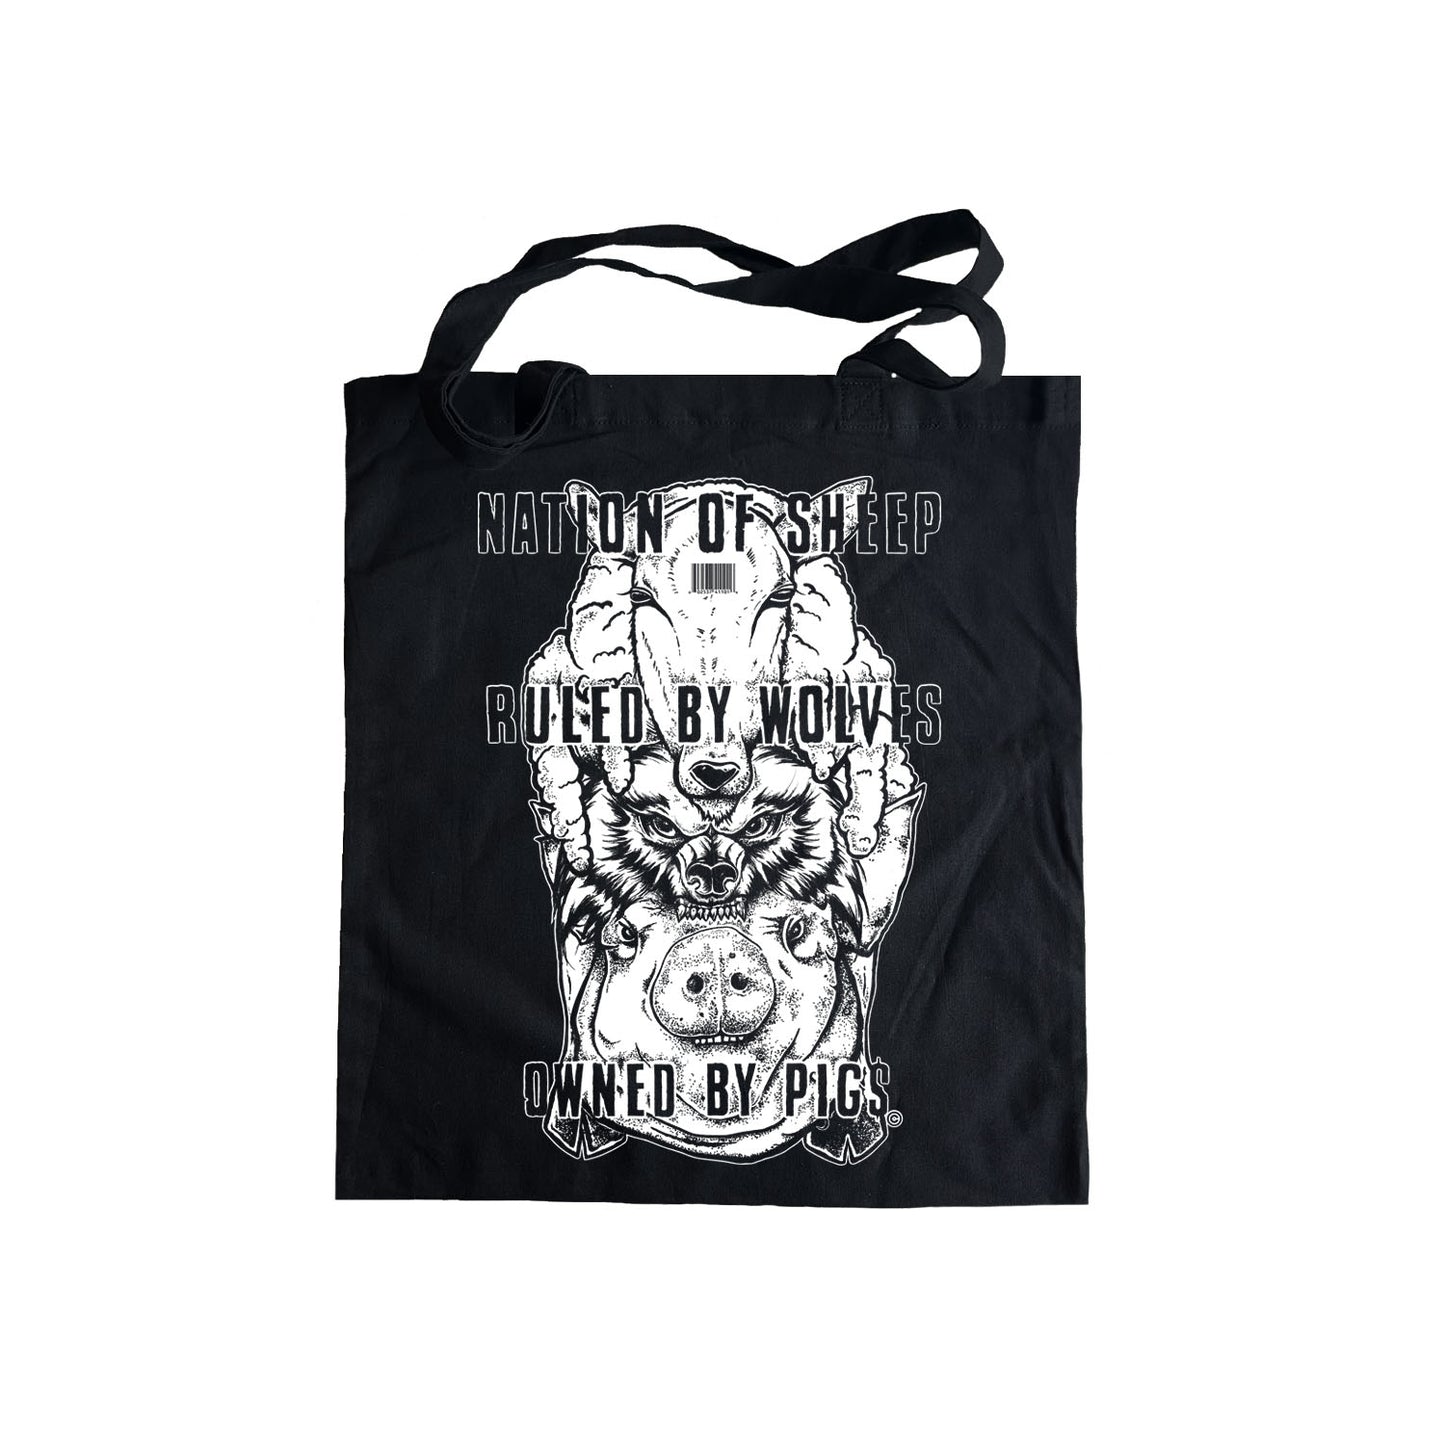 Rebel Against the Herd: Nation of Sheep, Led by Wolves, Owned by Pigs" Tote Bag